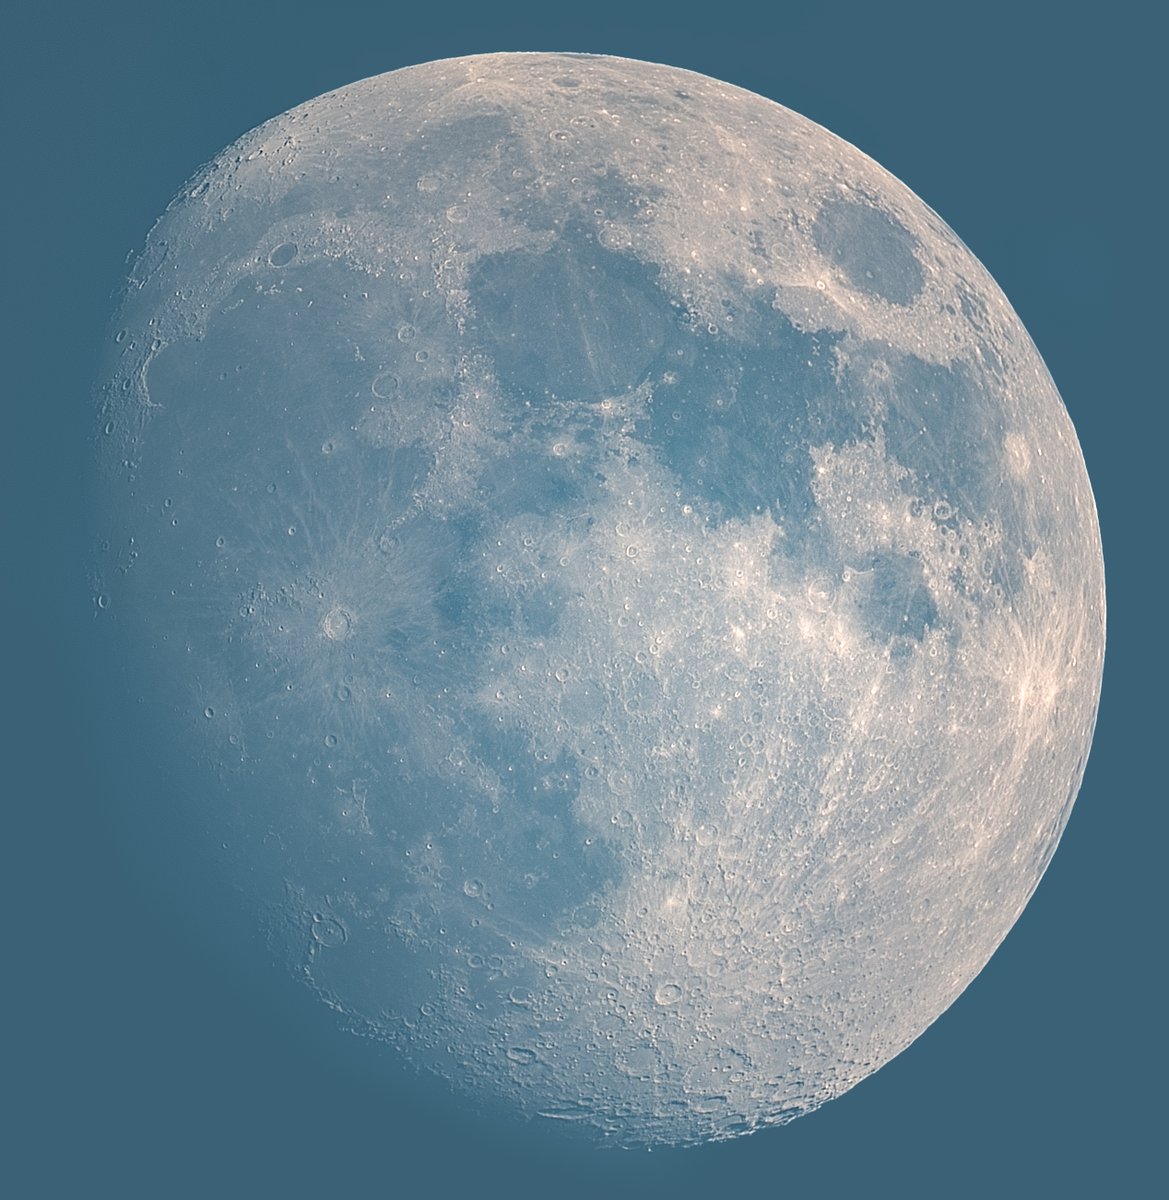 Sunday (19th May) evenings Moon at 87%. Image captured using SharpCaps Live Stacking tool. 100 images stacked together. @MoonHourSocial #astronomy #astrophotography @ThePhotoHour